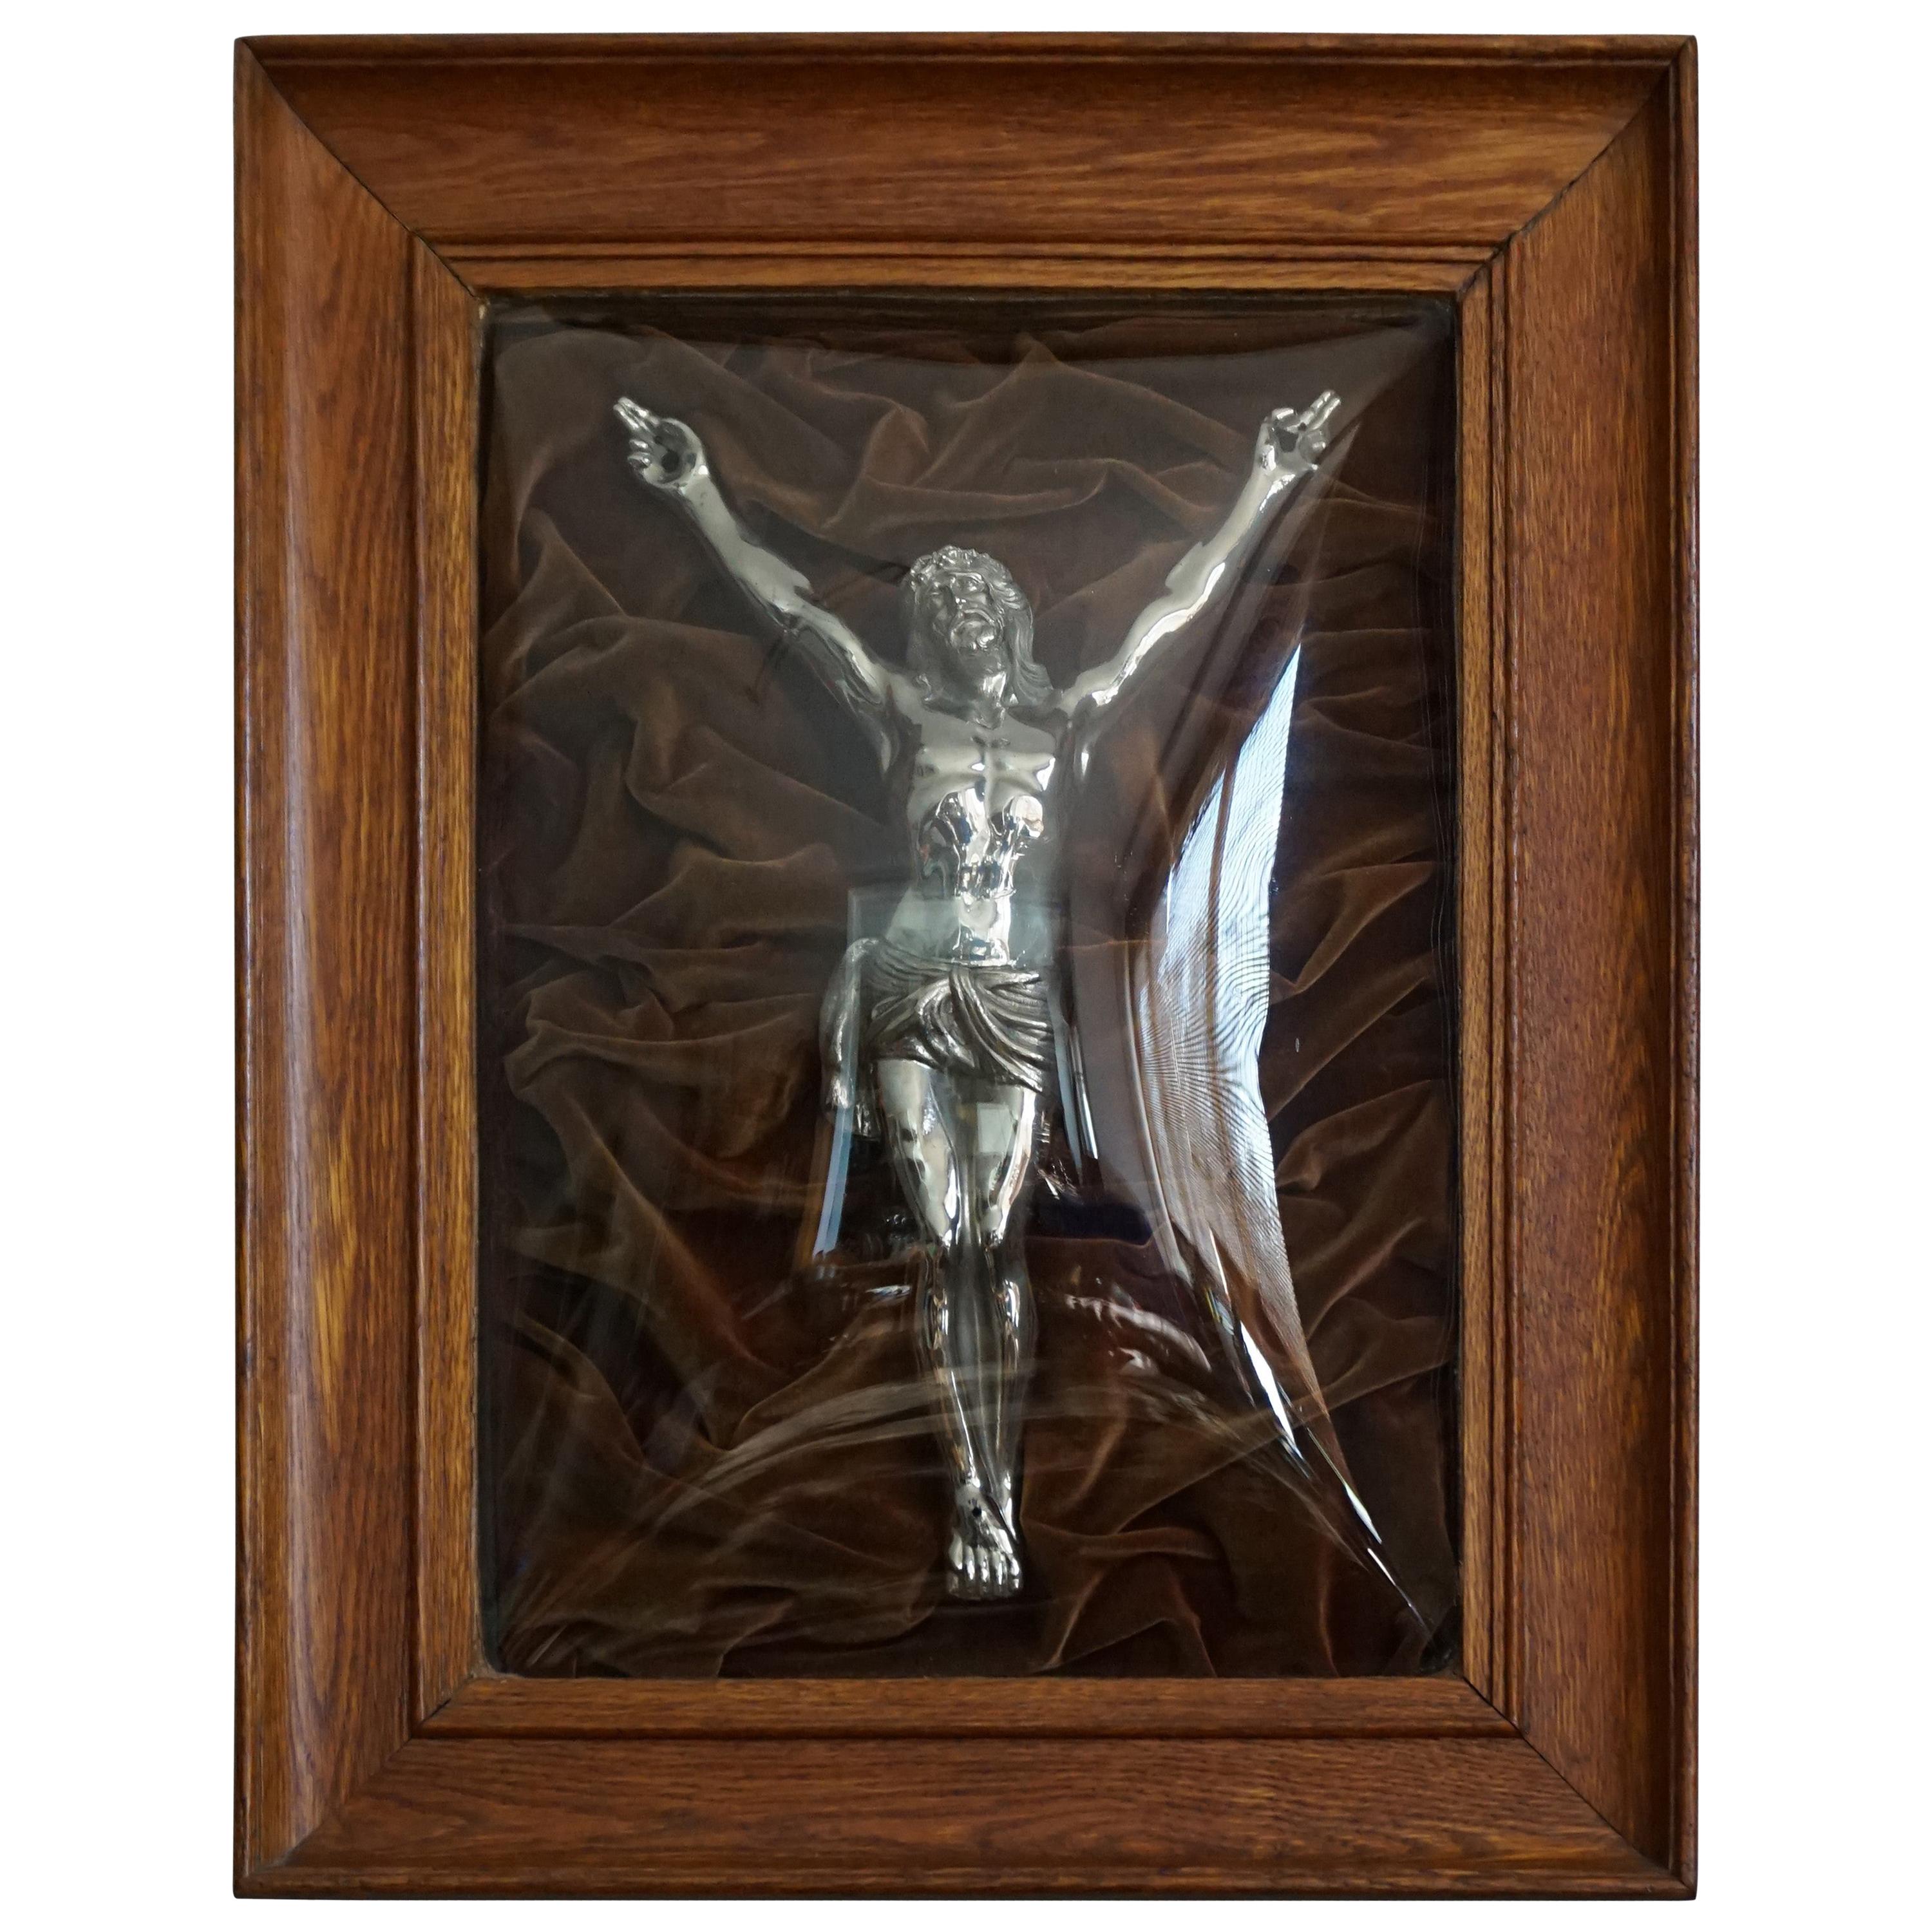 Stunning Mercury Silver Color Antique Metal Corpus of Christ Behind a Glass Dome For Sale